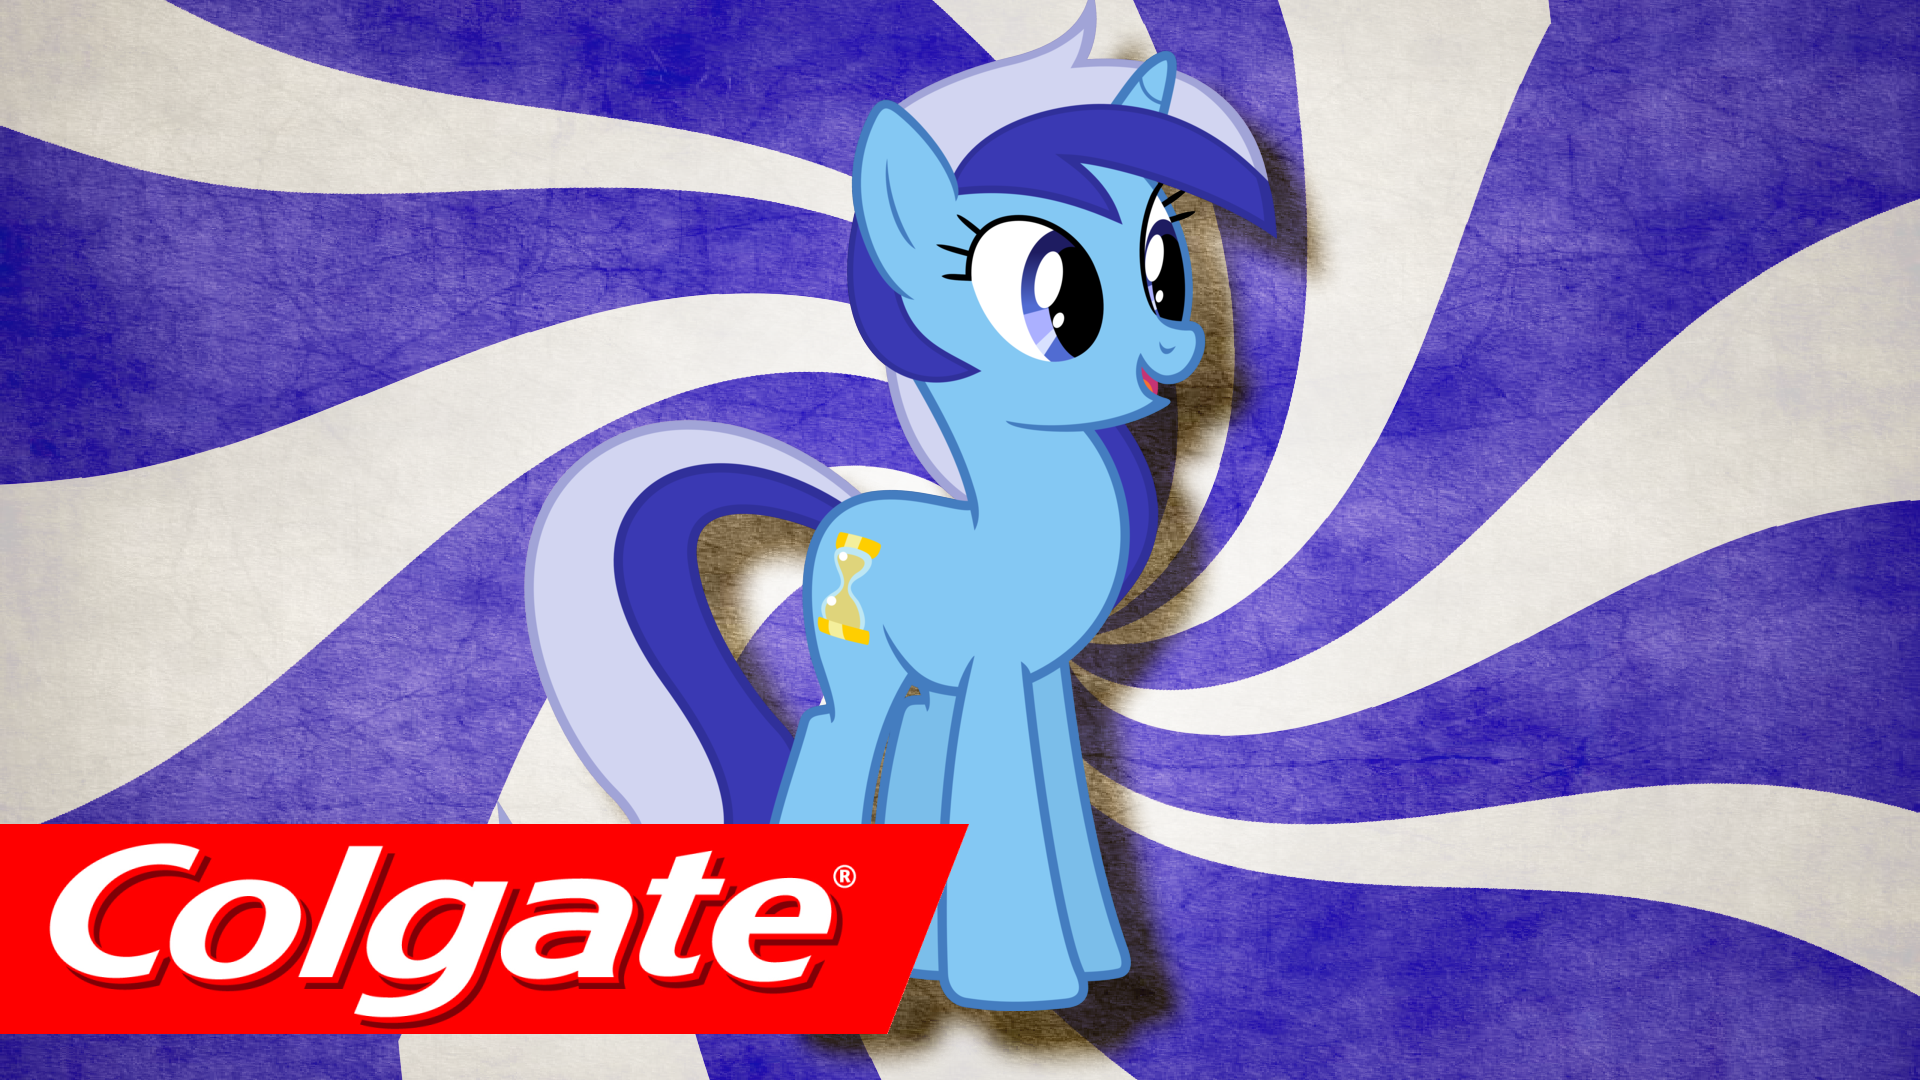 Colgate Wallpaper by 90Sigma and ChristopherJB